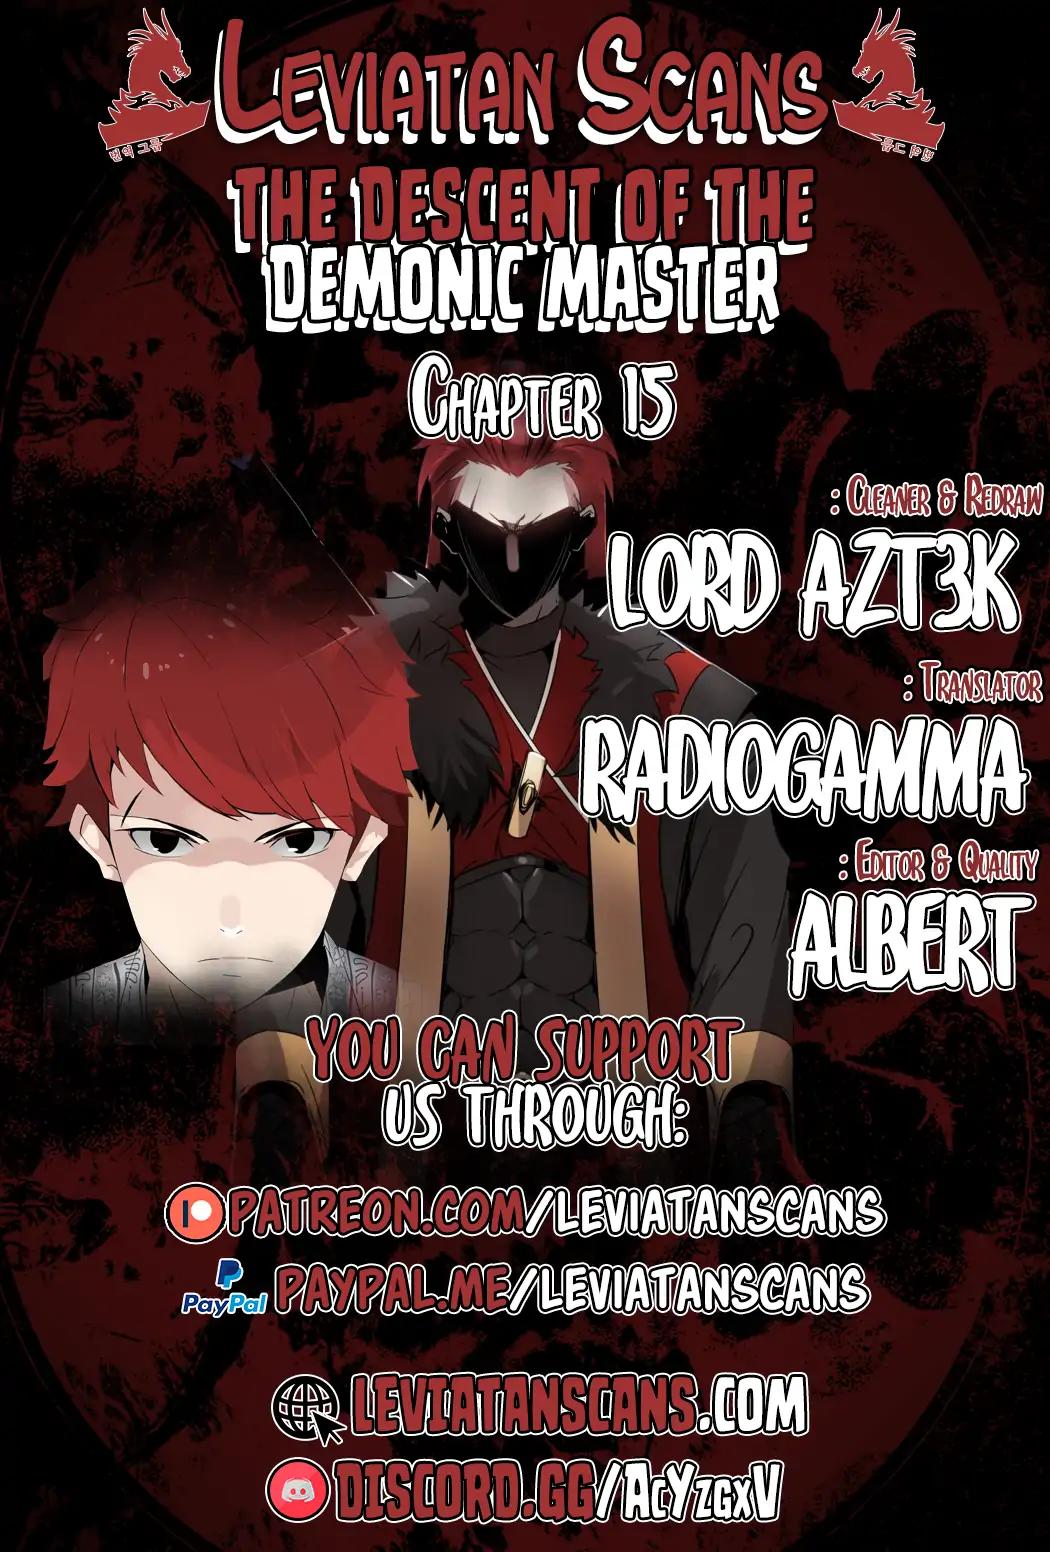 The Descent of the Demonic Master Chapter 15